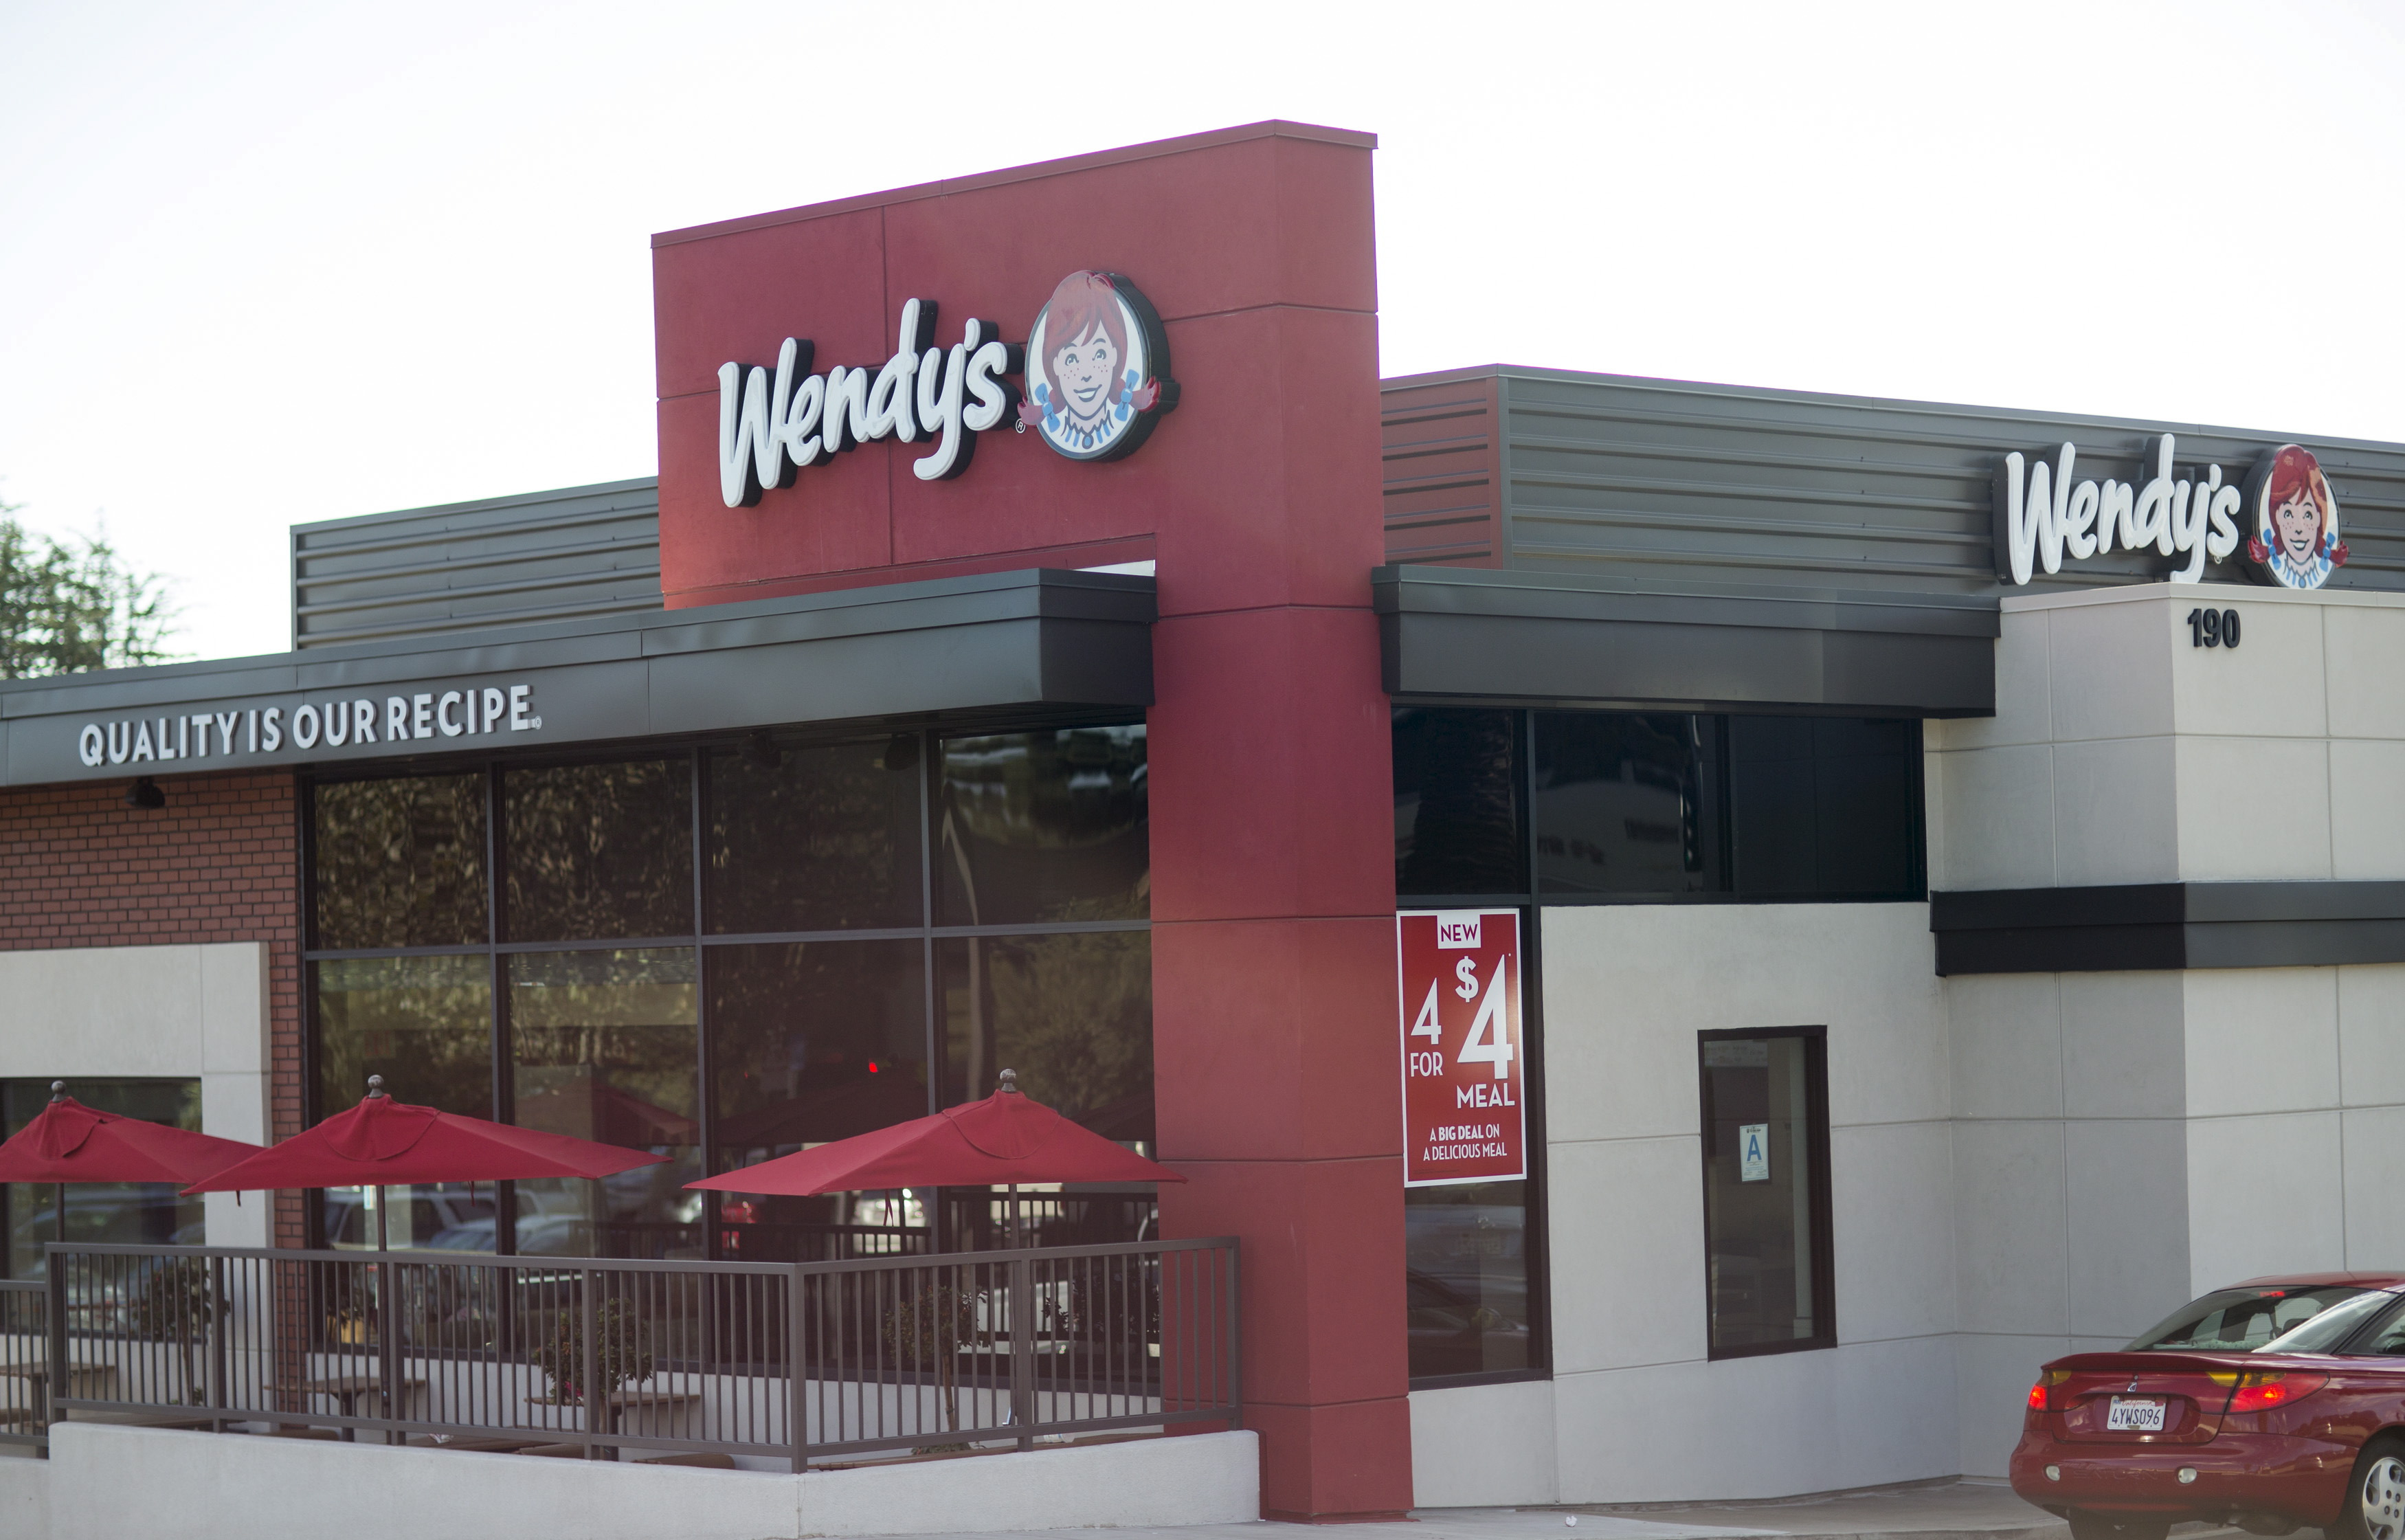 Wendy's '4 for $4' fullfilling a need, Food Business News